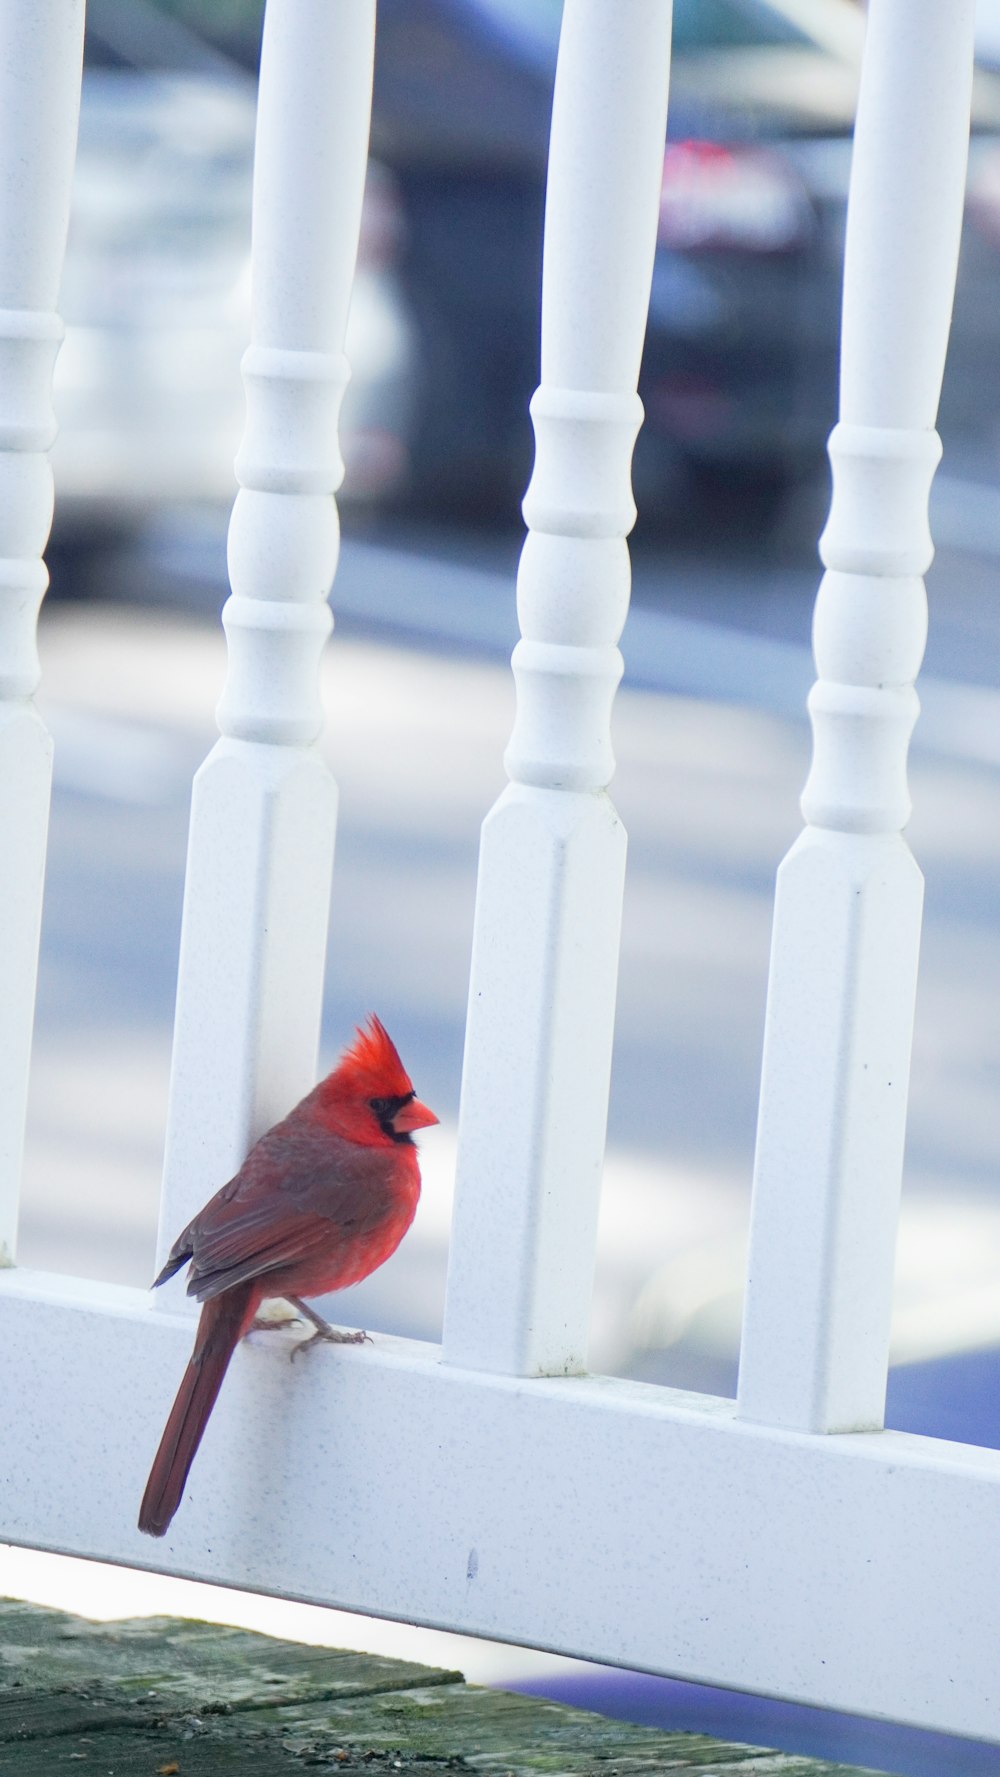 a small red bird perched on a white railing